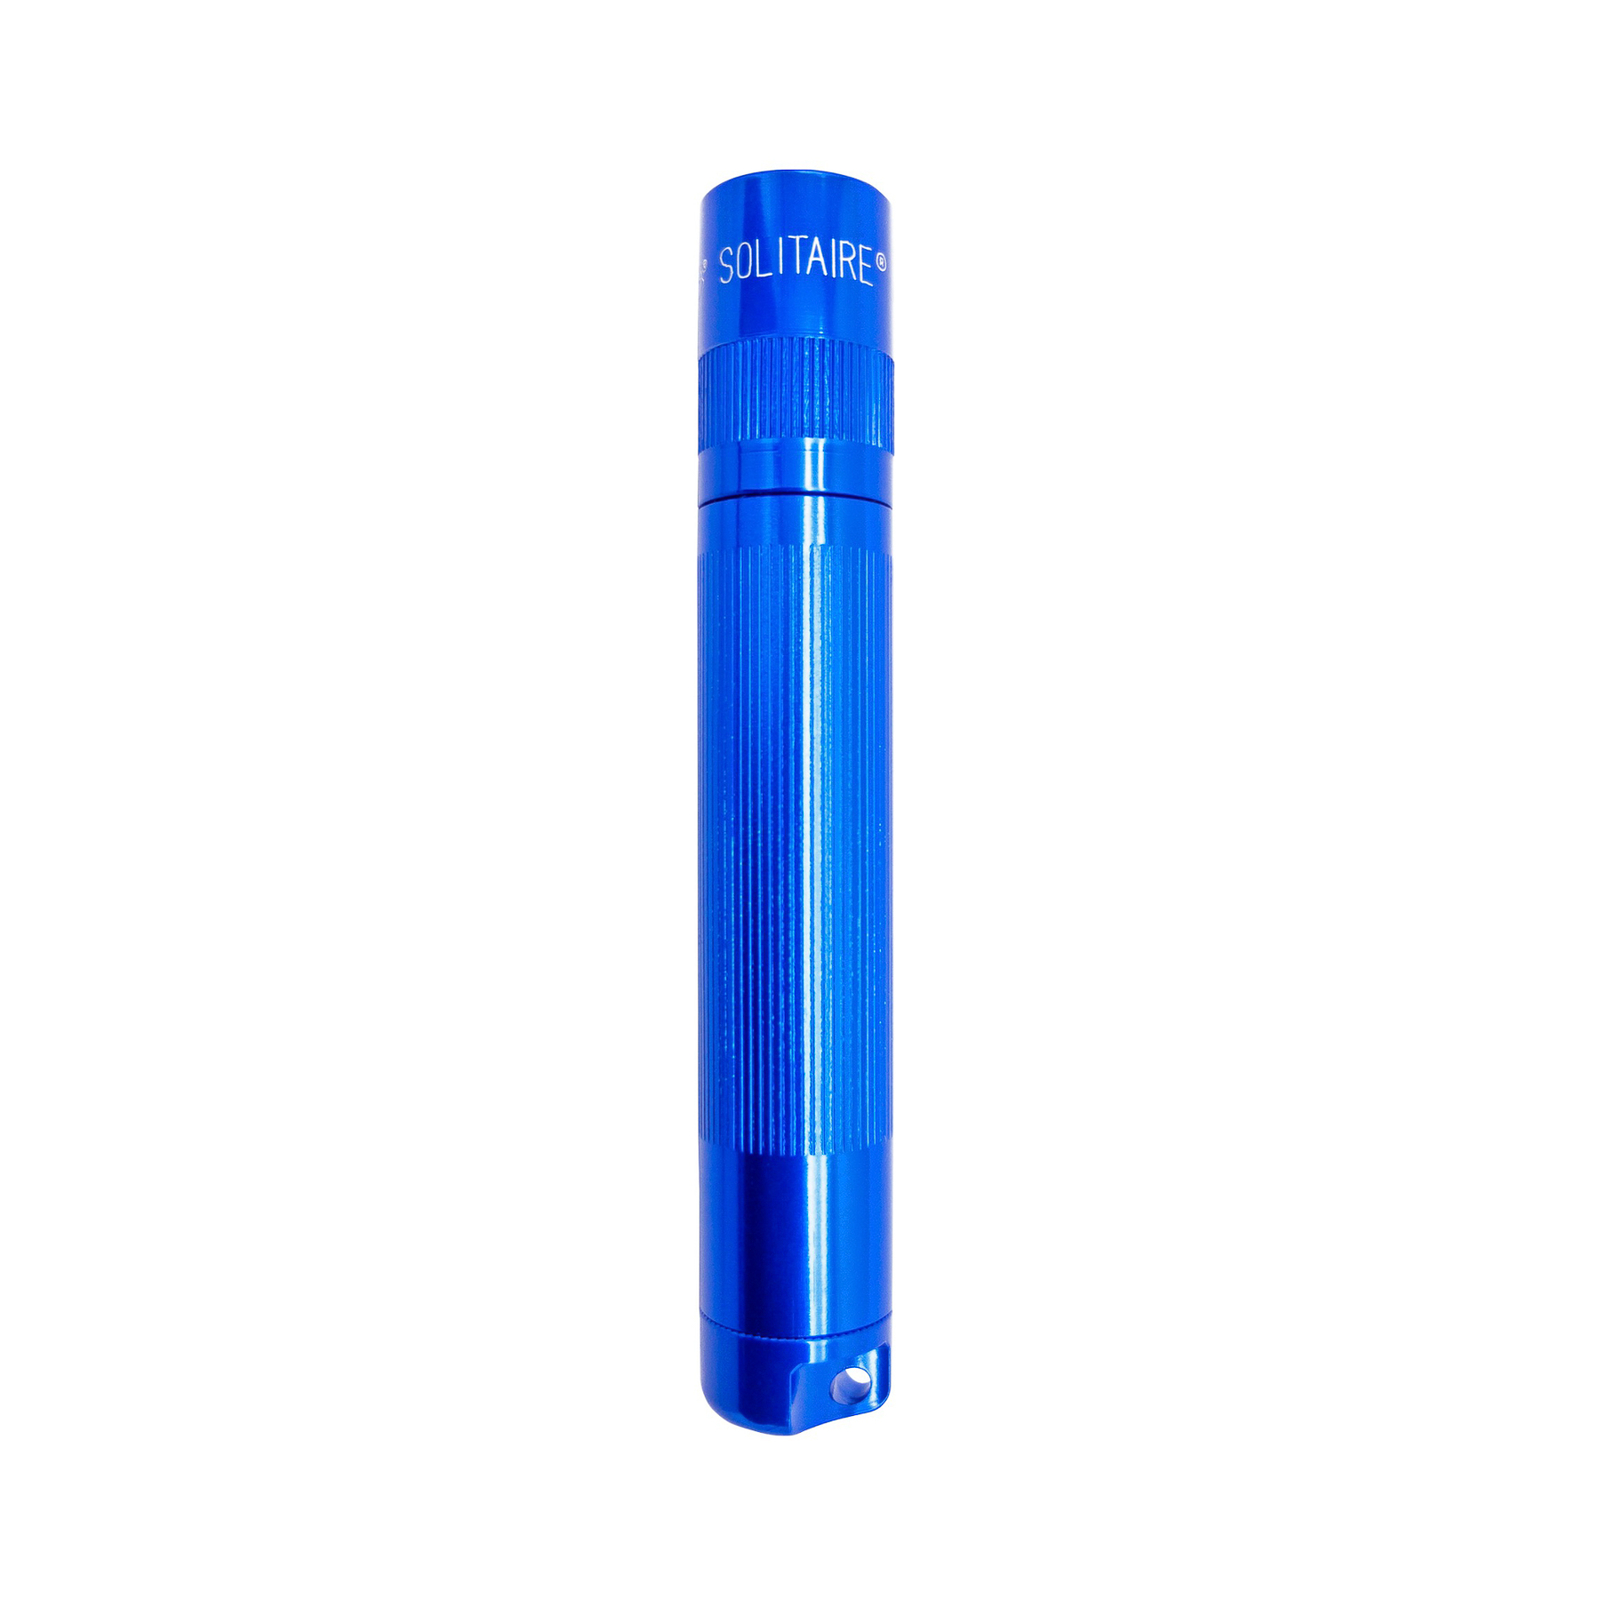 Maglite LED zaklamp Solitaire, 1 Cell AAA, box, blauw